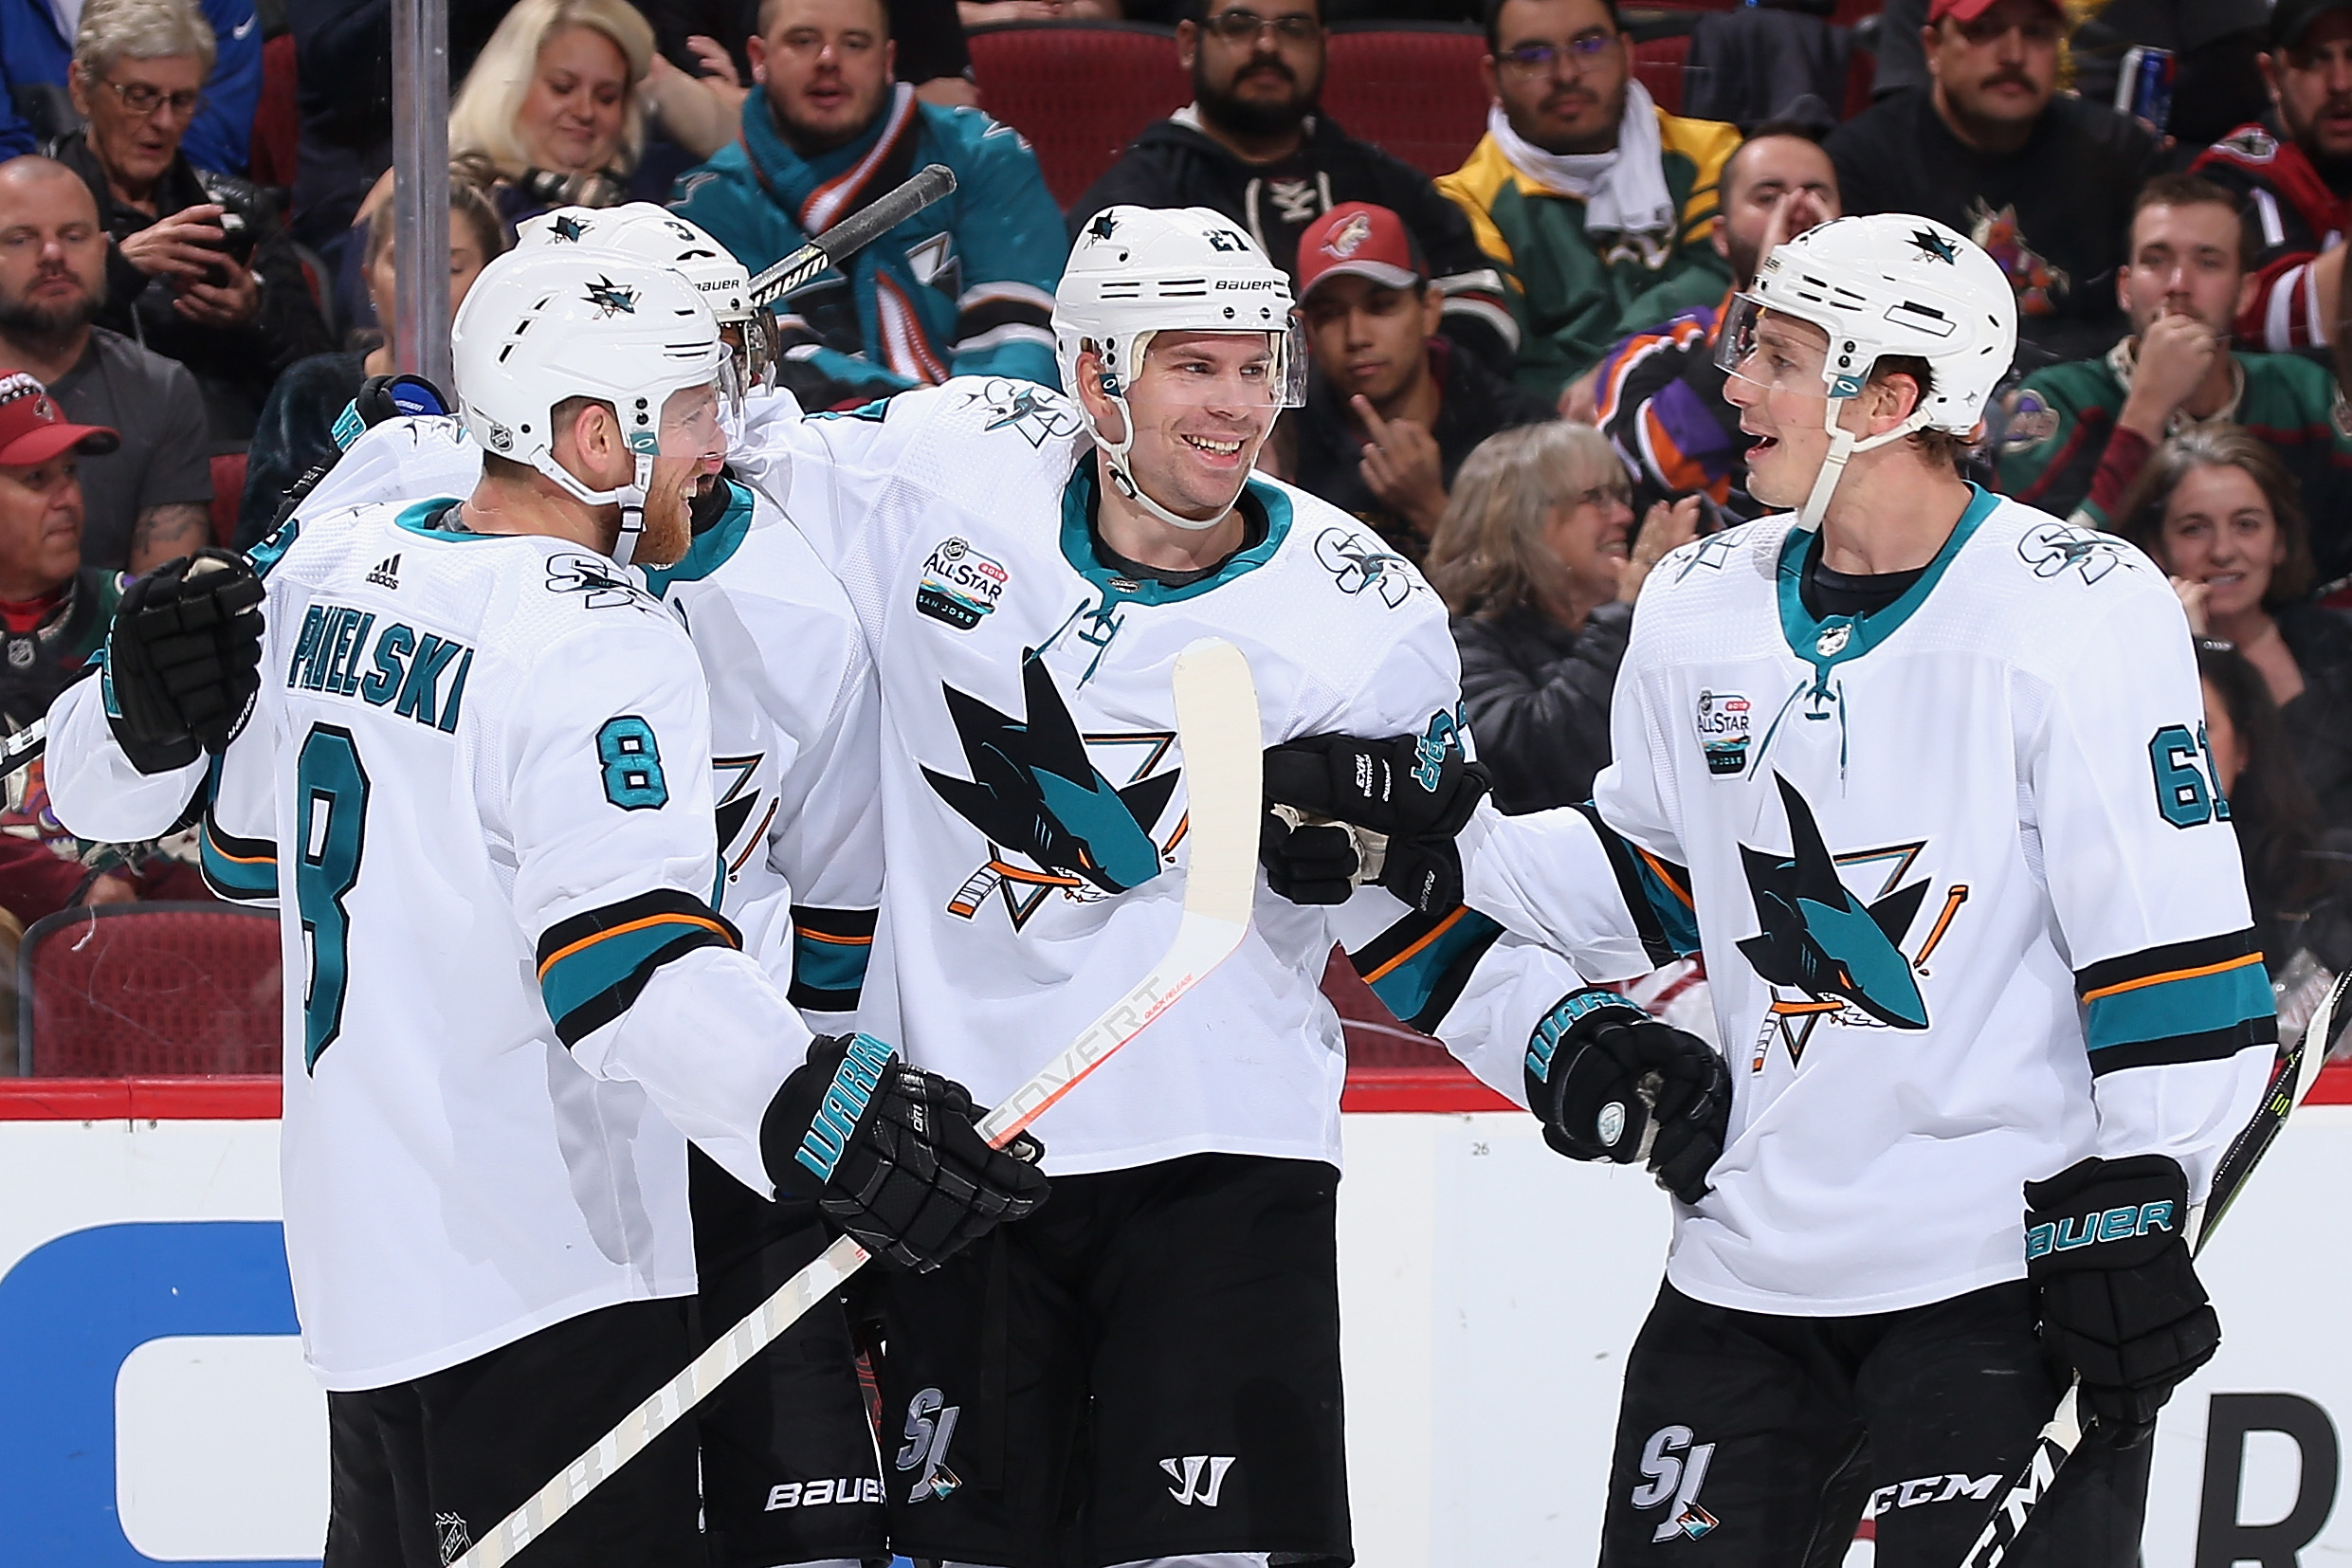 GLENDALE, ARIZONA - DECEMBER 08: (L-R) Joe Pavelski #8, Evander Kane #9, Joonas Donskoi #27 and Justin Braun #61 of the San Jose Sharks celebrate after Kane scored a goal against the Arizona Coyotes during the second period of the NHL game at Gila River A